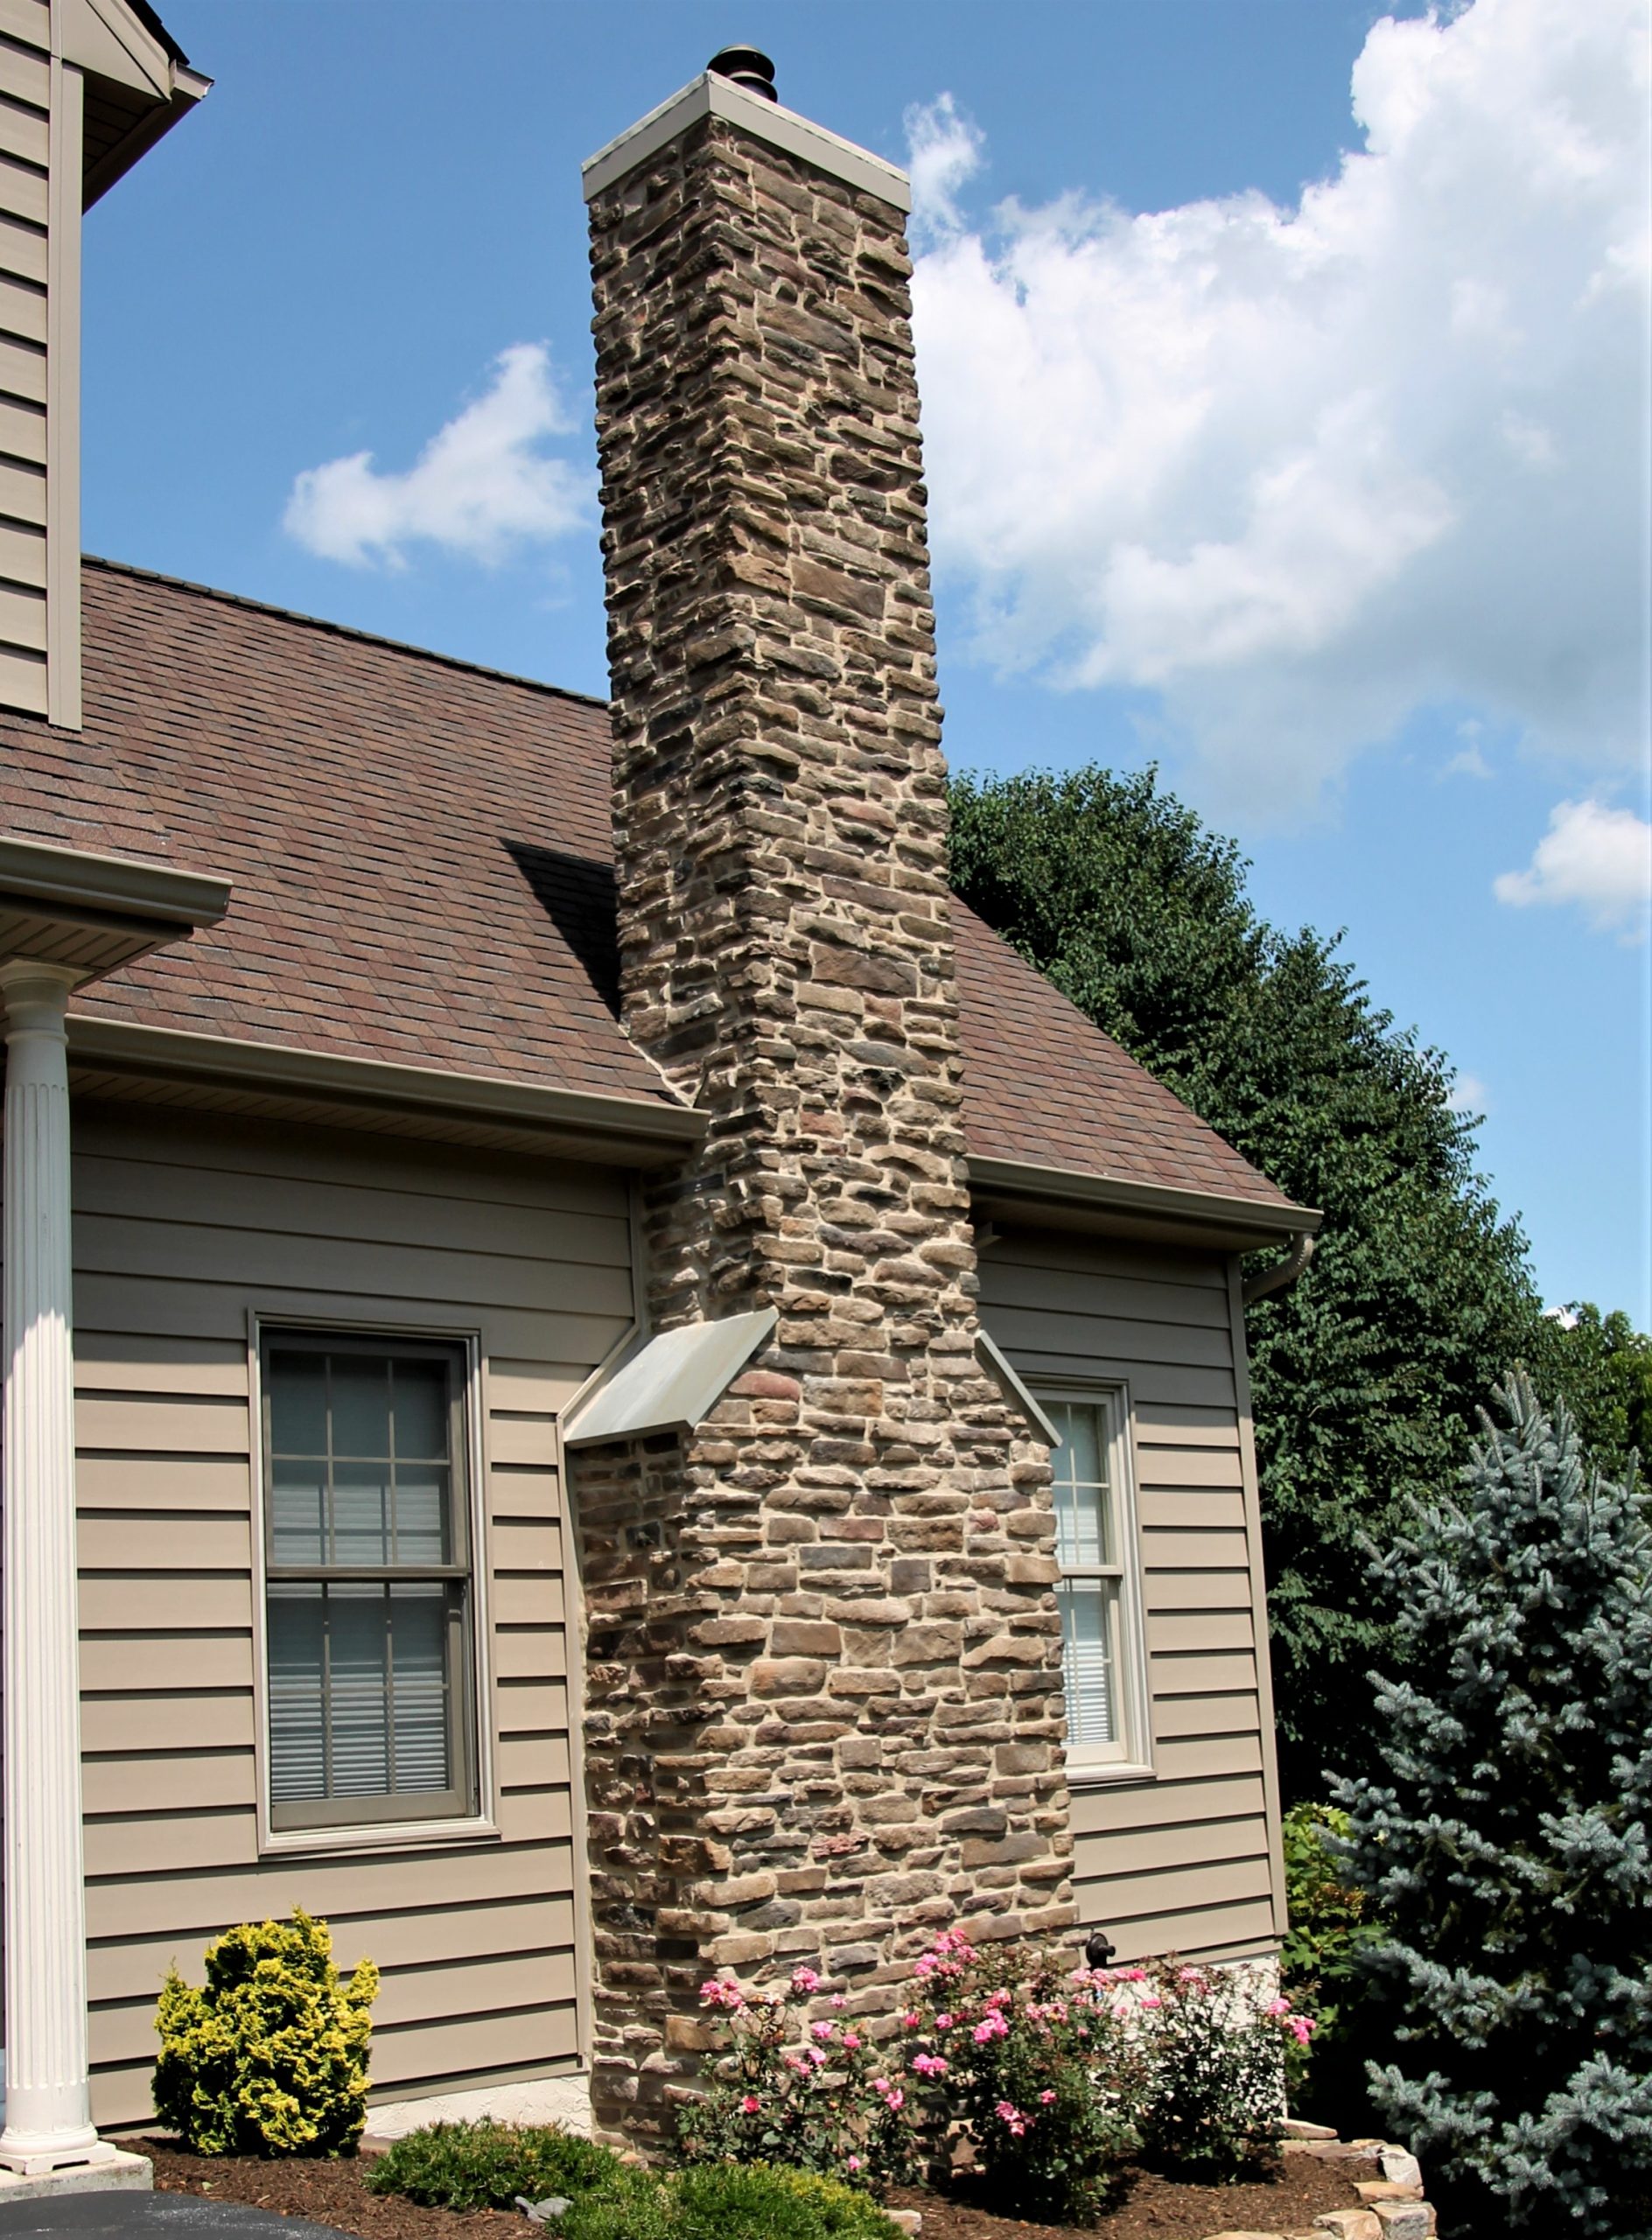 Exterior of a stone chimney